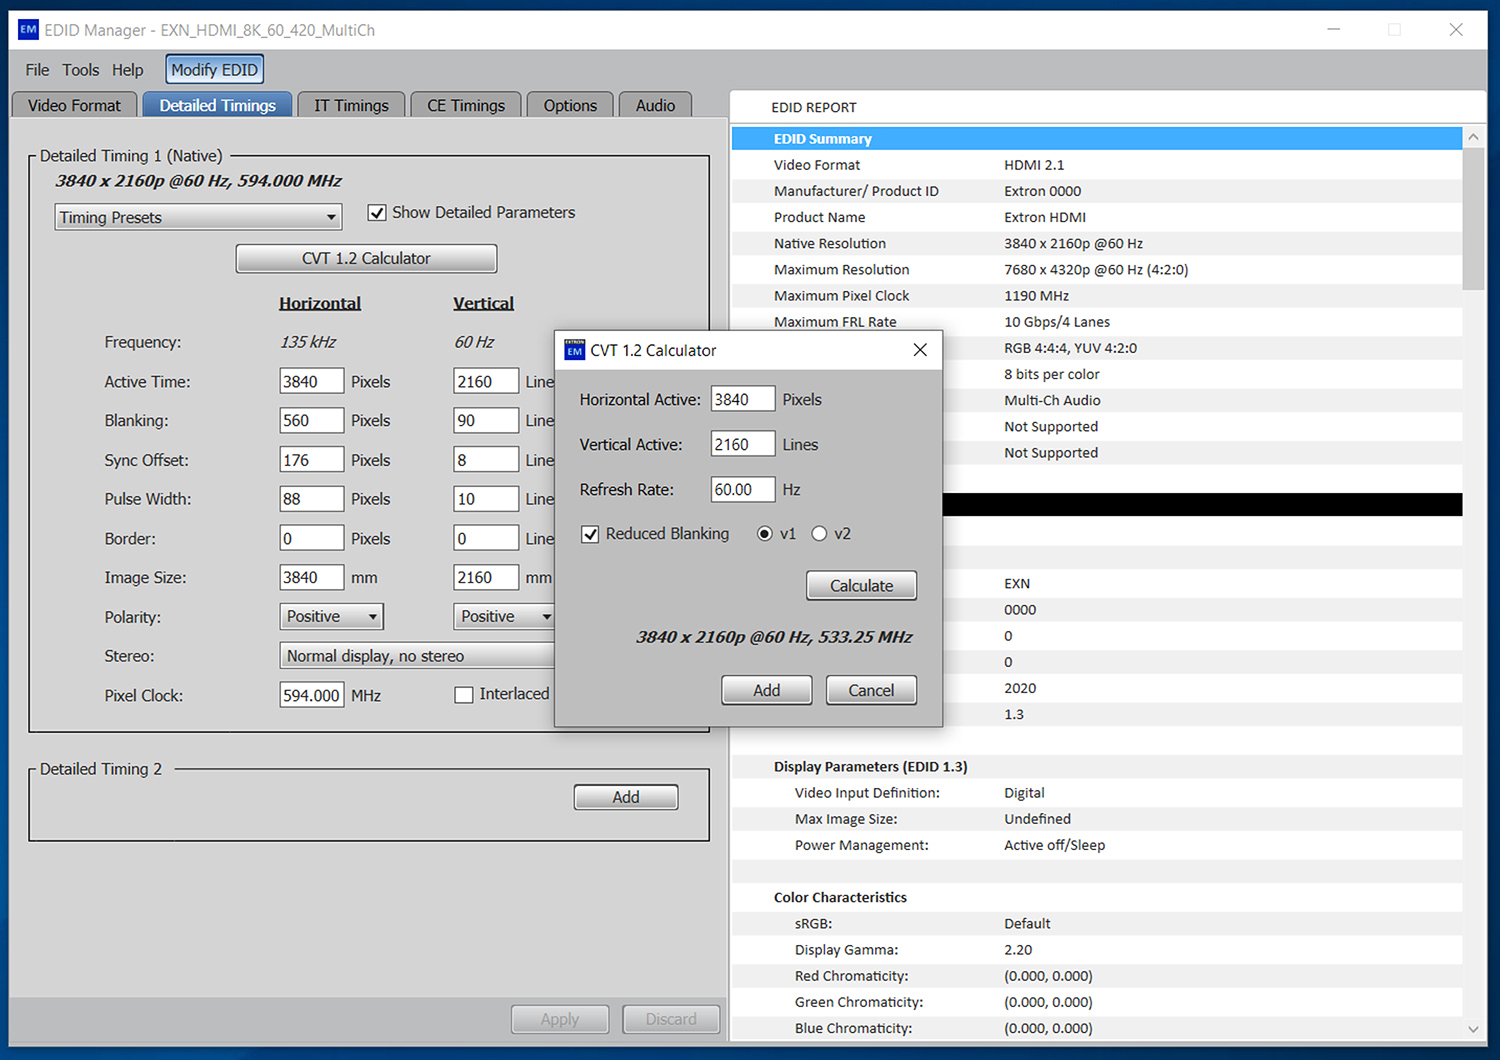 EDID Manager 2.1 - Detailed Timings and CVT